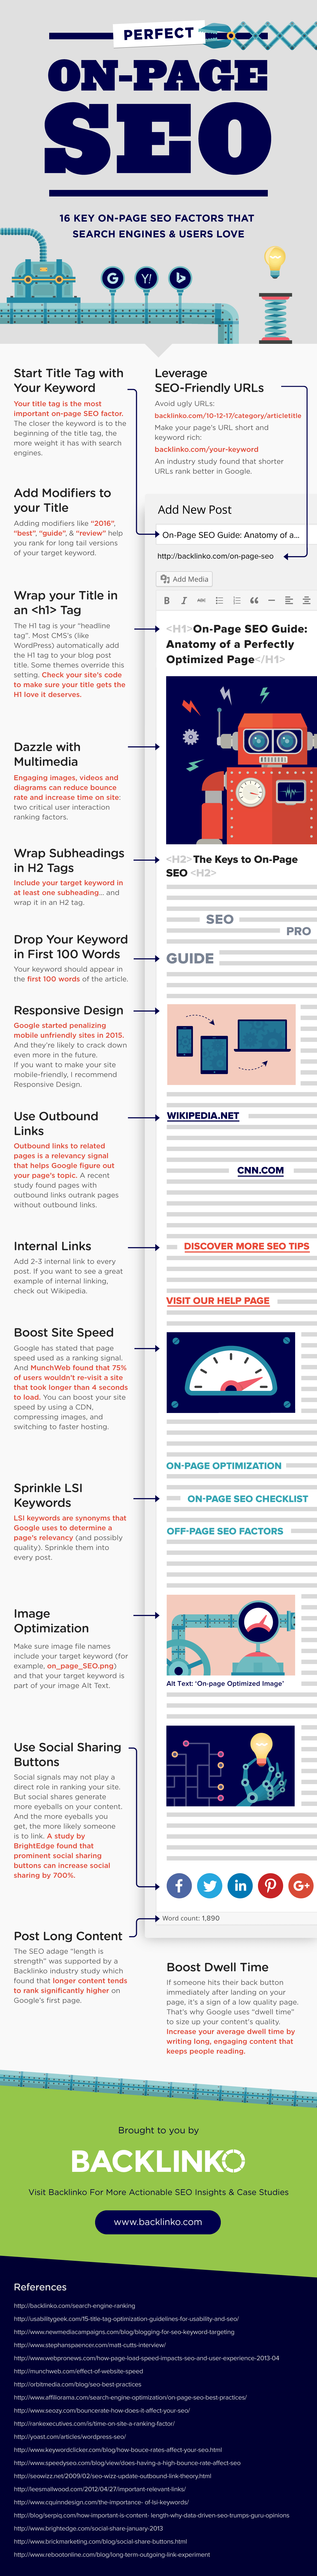 on_page_seo_infographic_v3-1